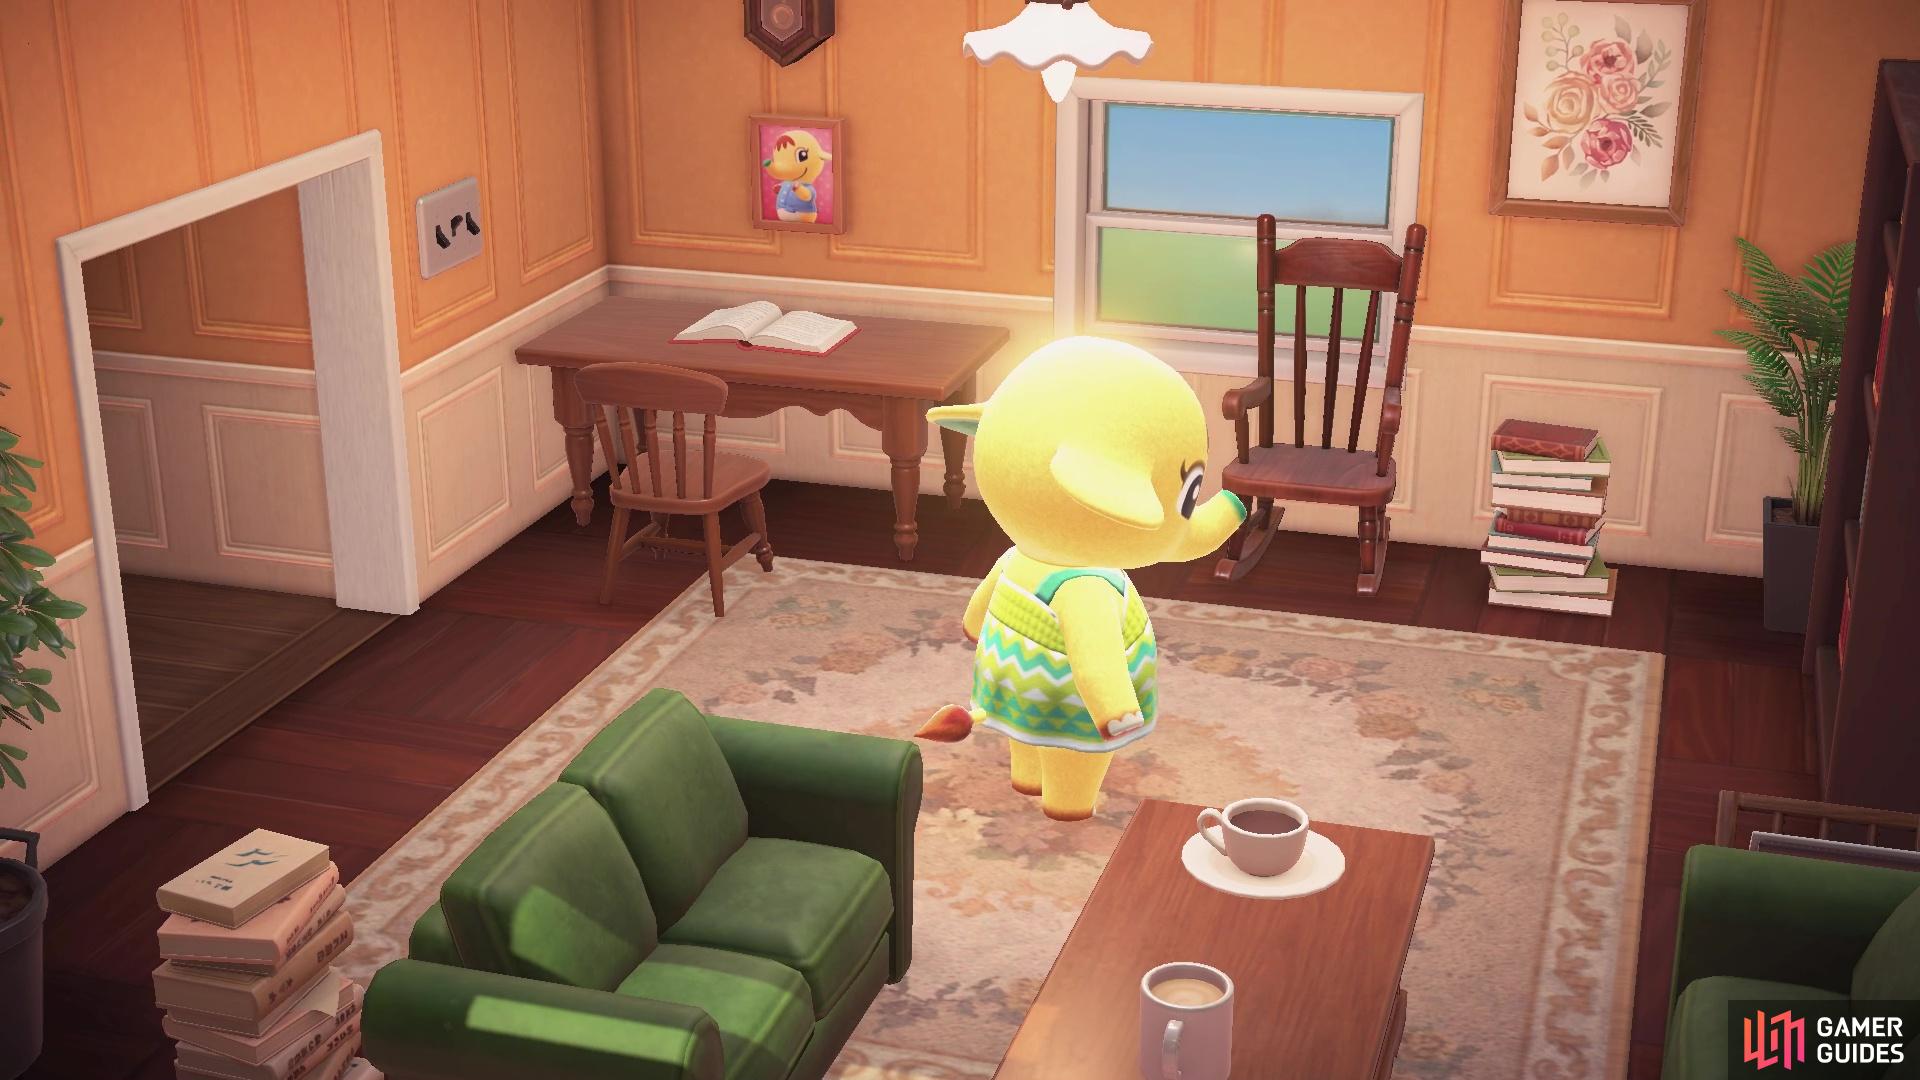 At the end, you'll get a brief cut scene of Eloise enjoying her new space.